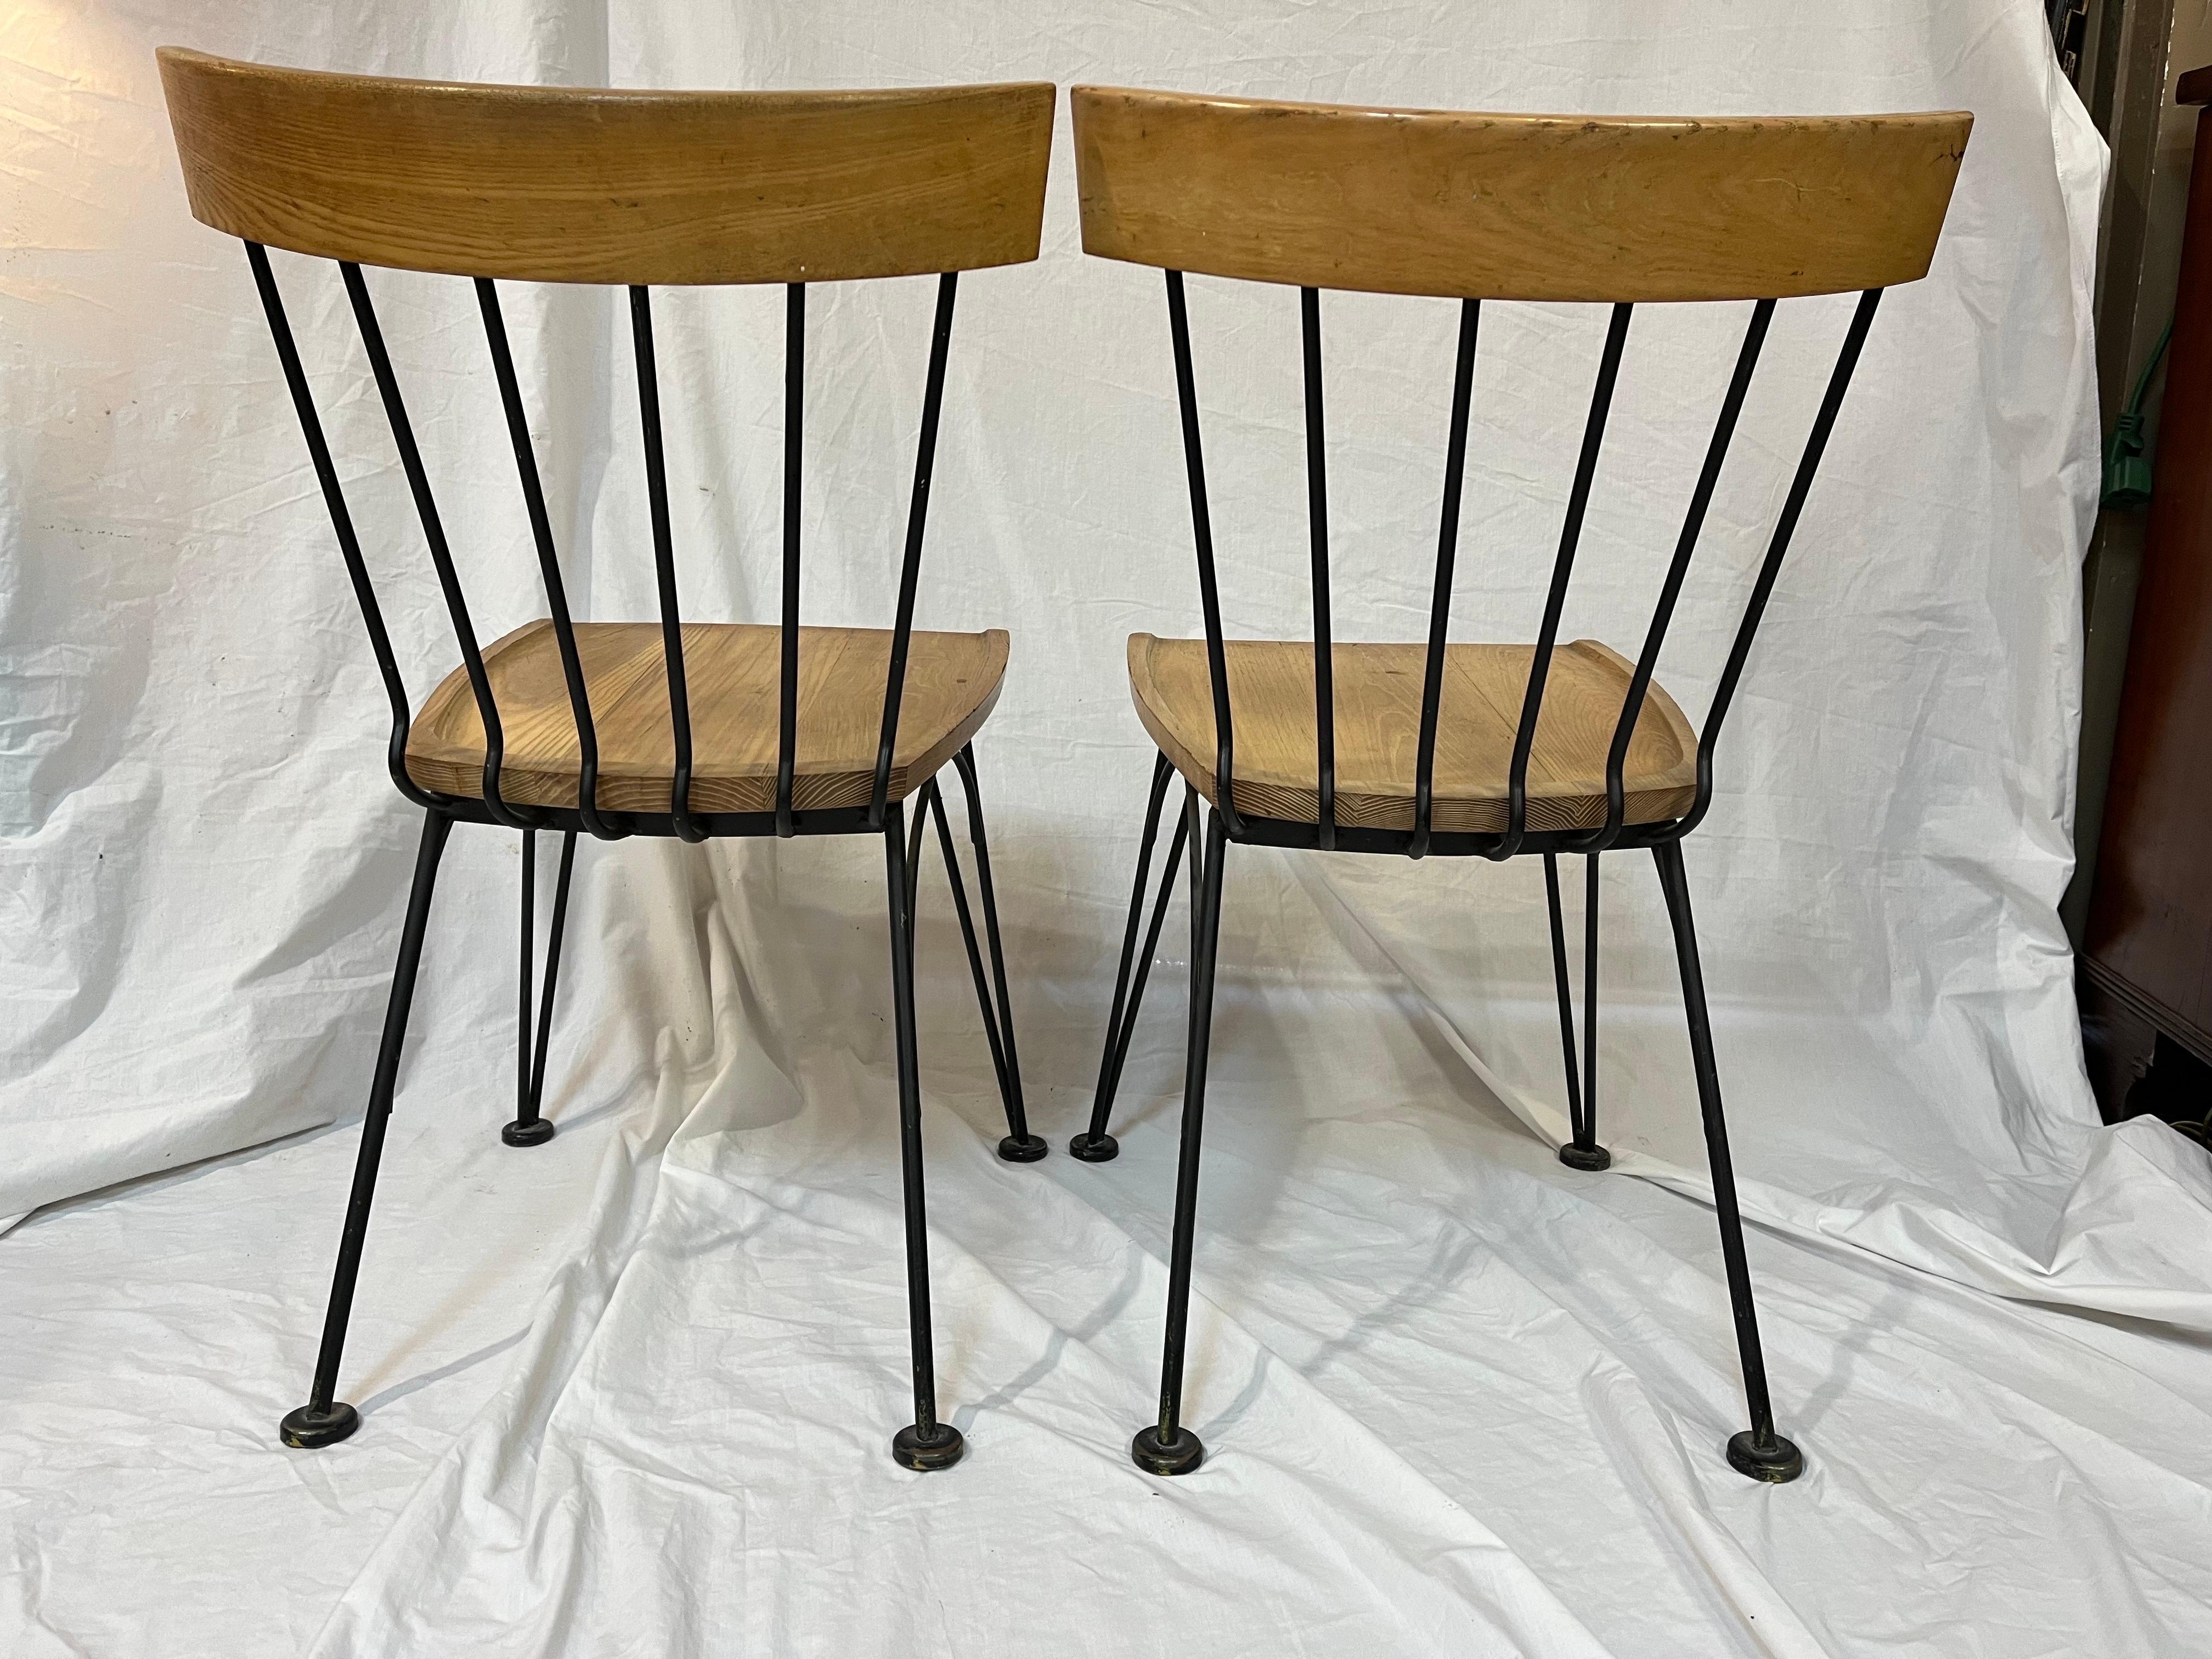 Pair of Lee Woodard Allegro Mid-Century Modern 1950s Iron and Wood Side Chairs For Sale 3